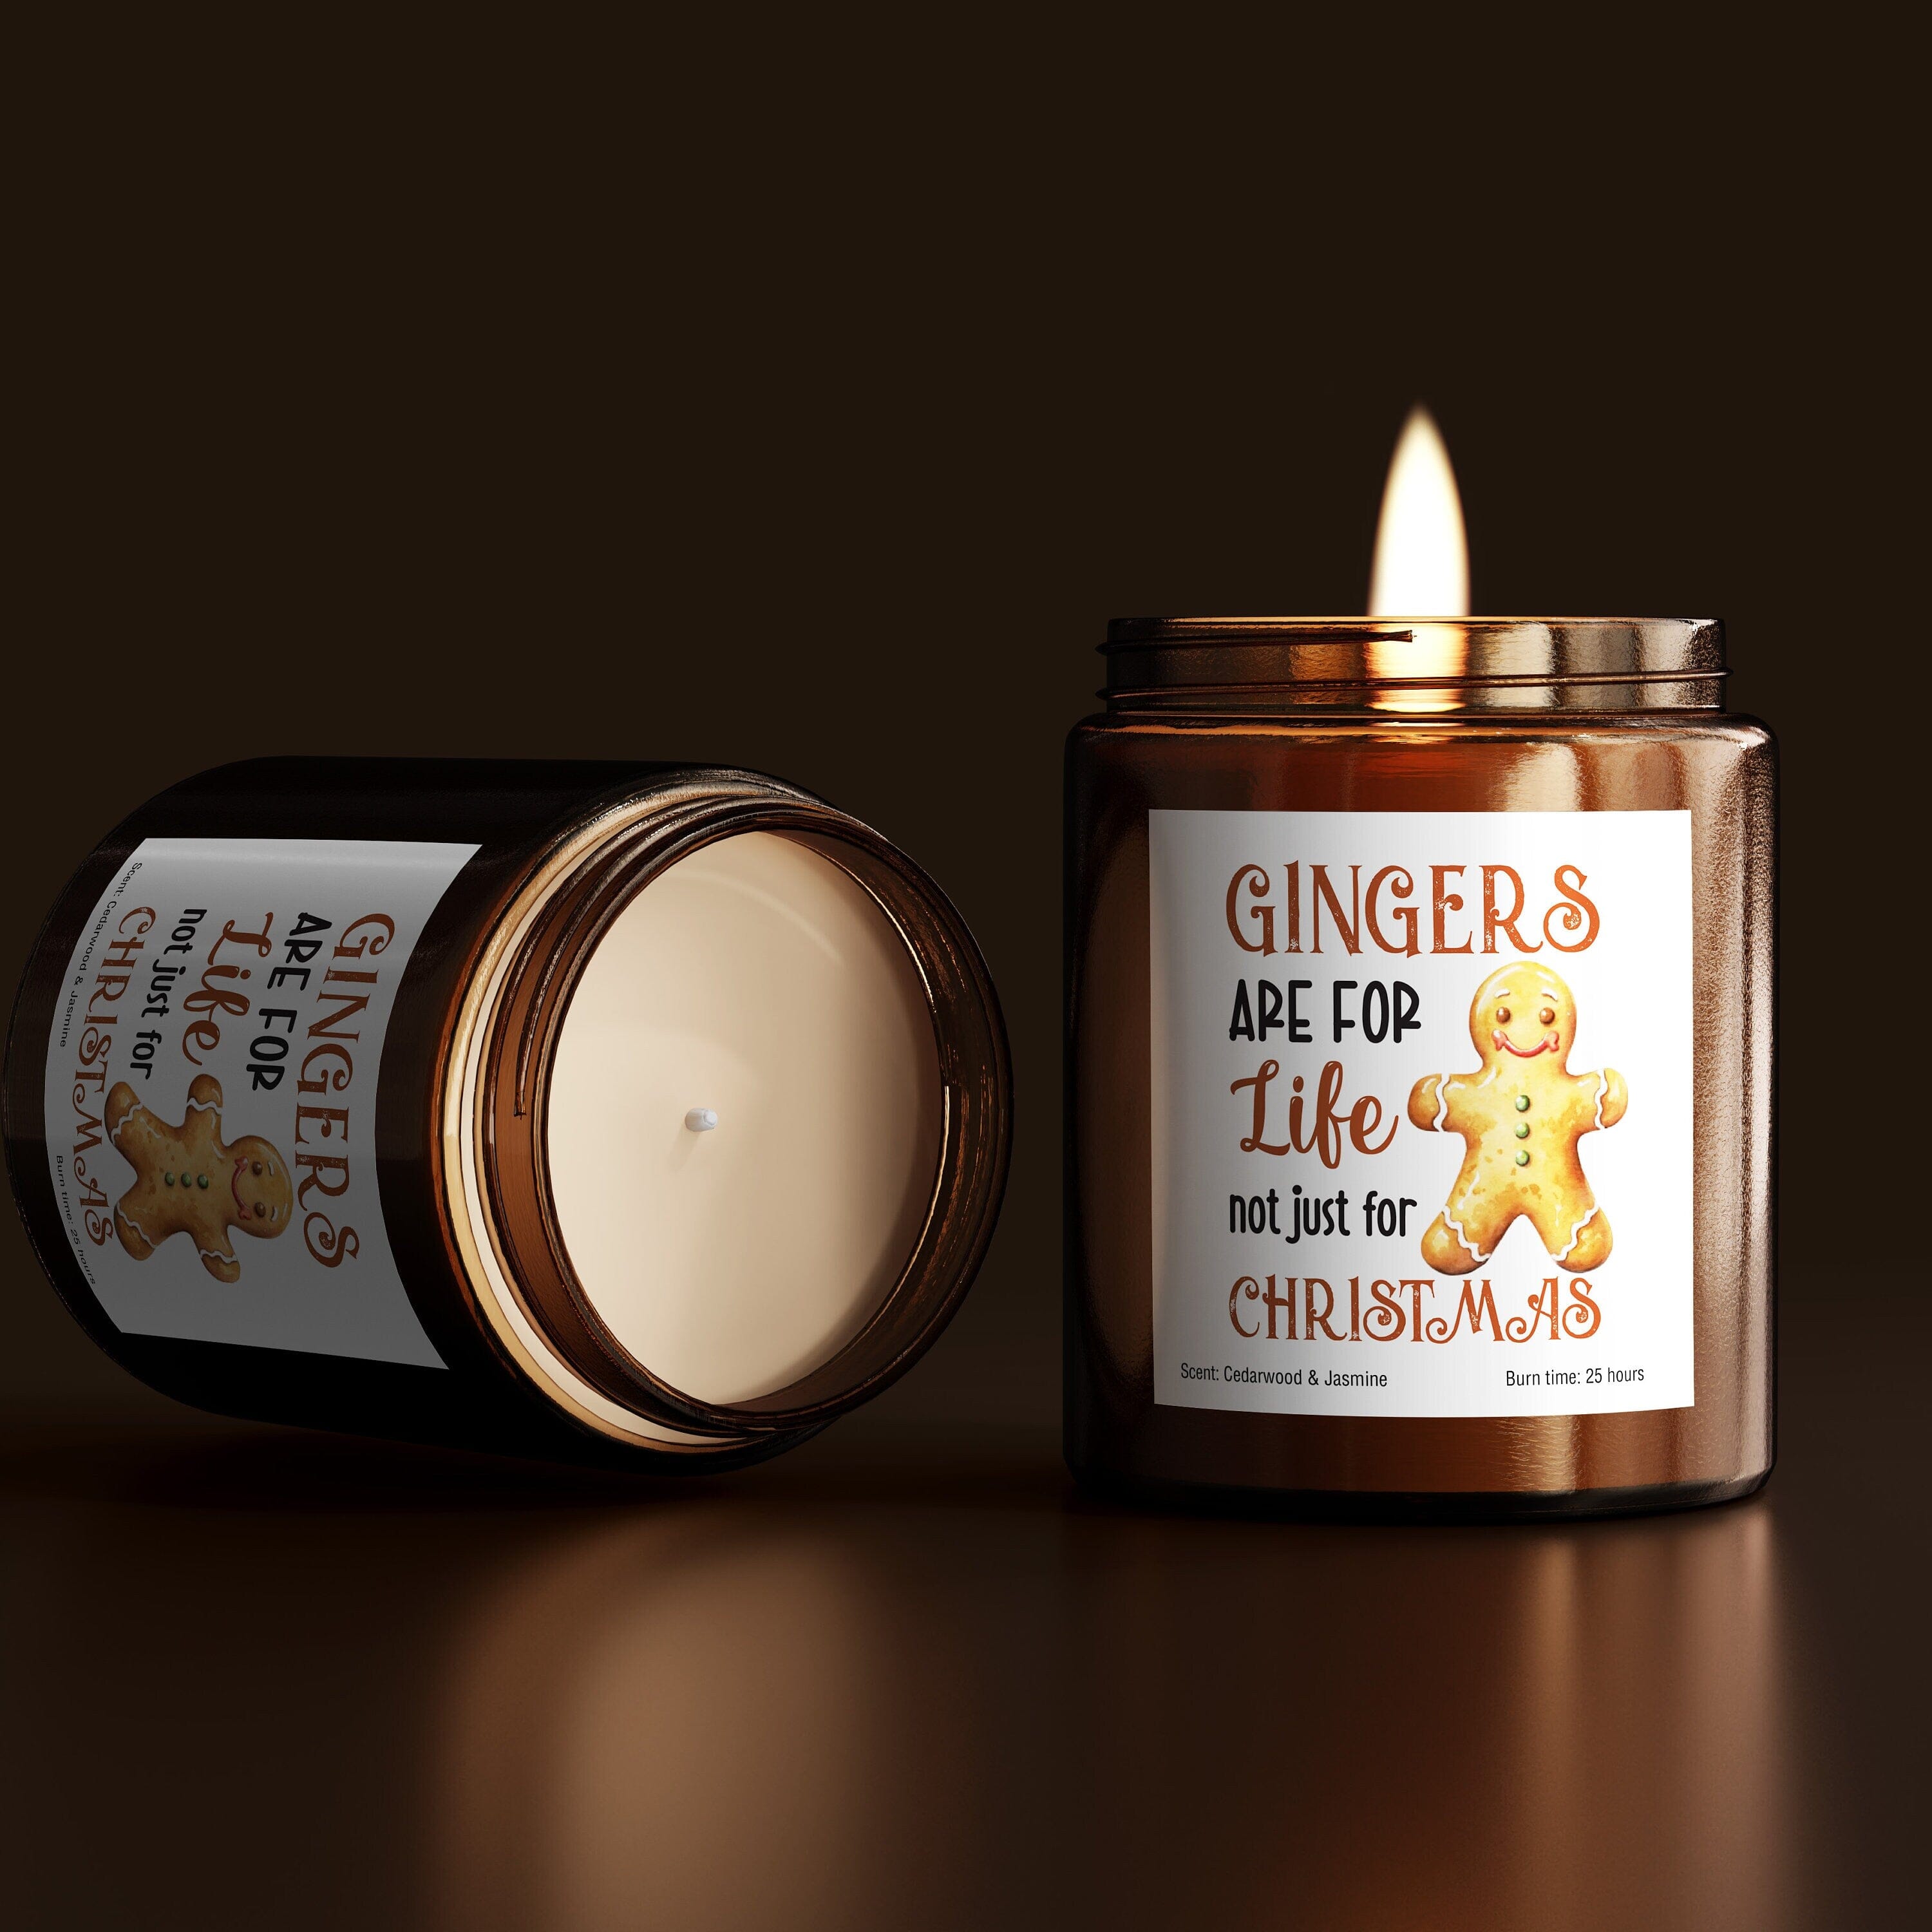 Gingers Are For Life Not Just For Christmas Candle, Christmas Gift for Her Him, Gingerbread Man lover